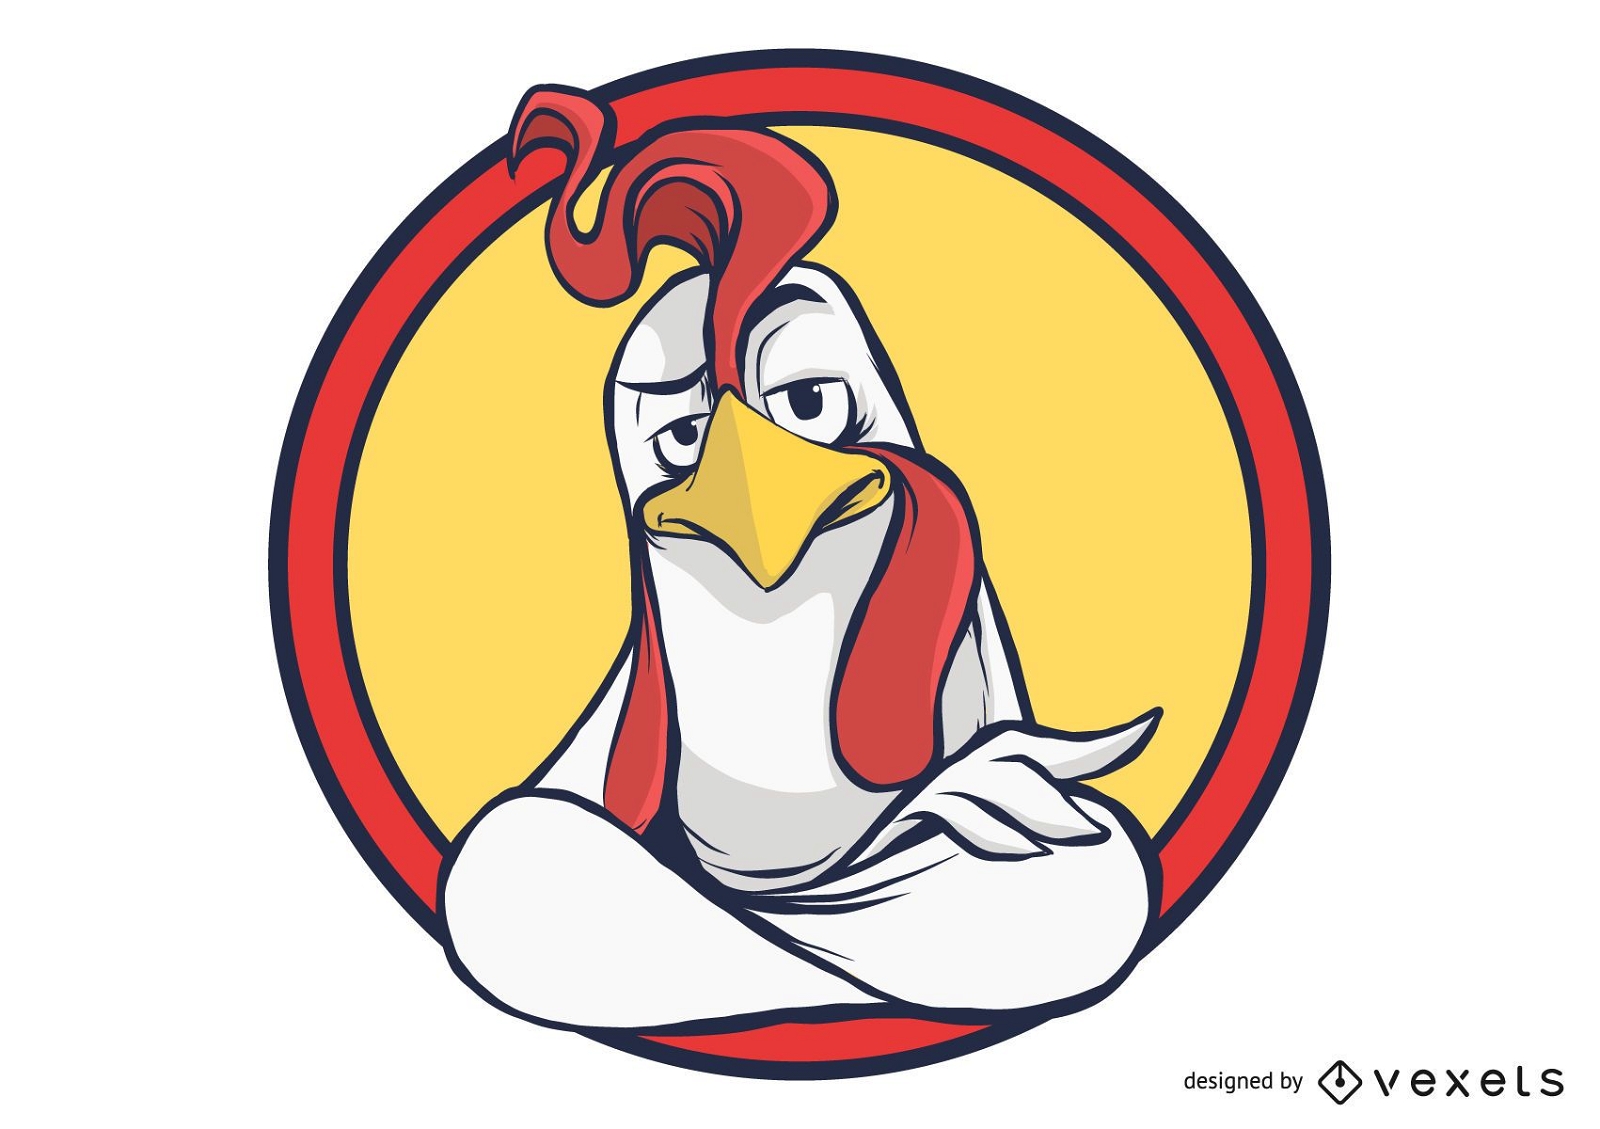 Rooster Cartoon inside Circles